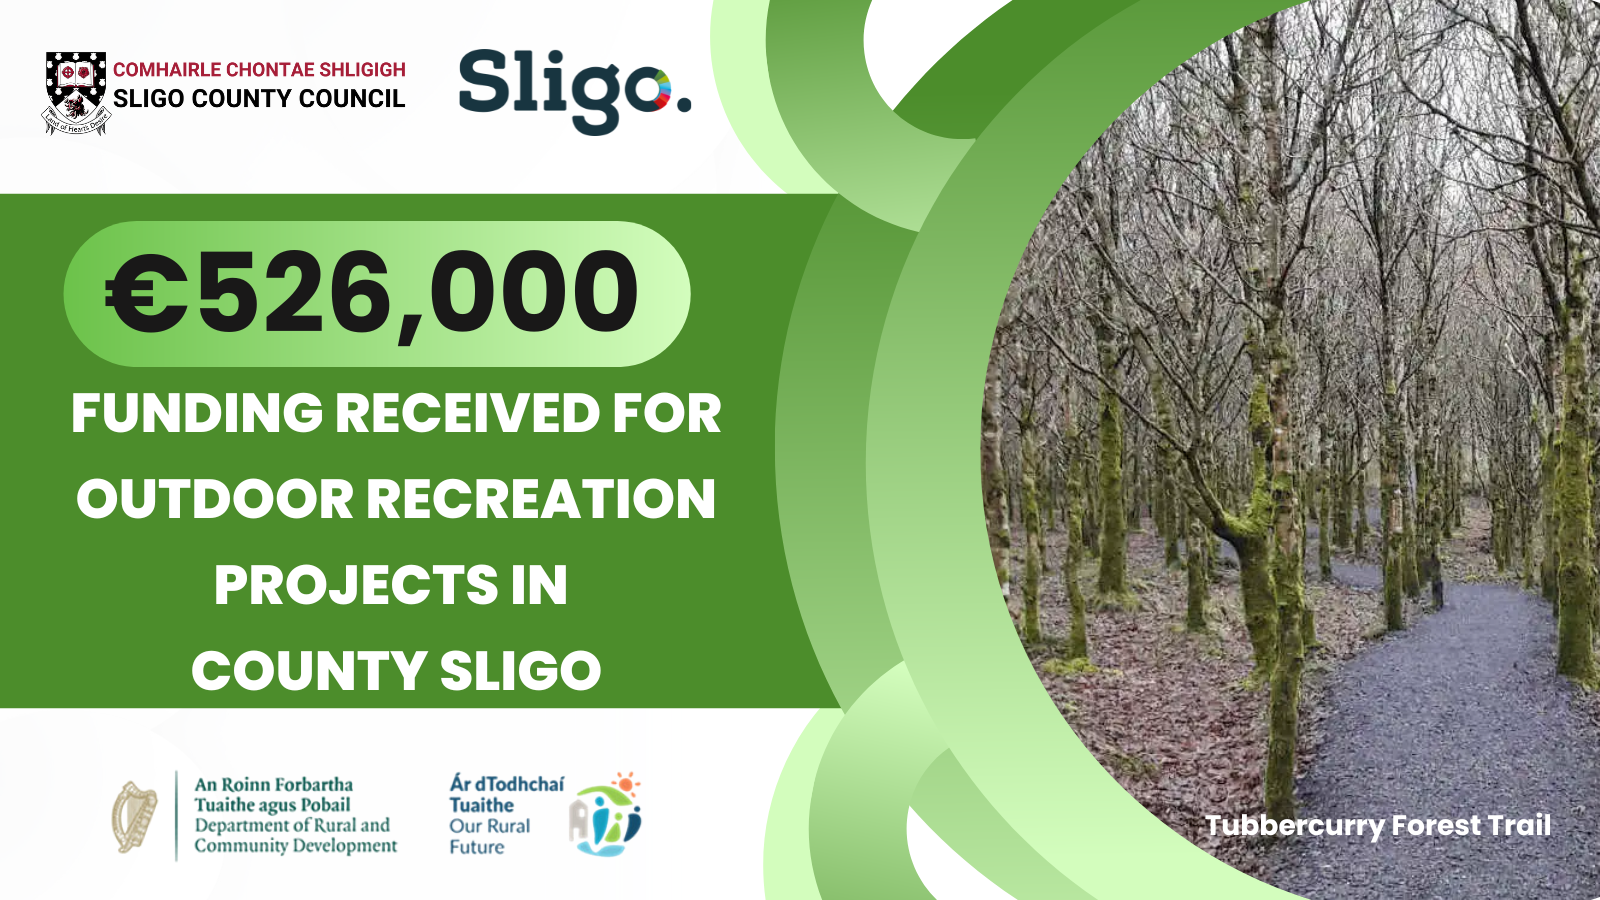 €526,000 Funding Received for Outdoor Recreation Projects in County Sligo

